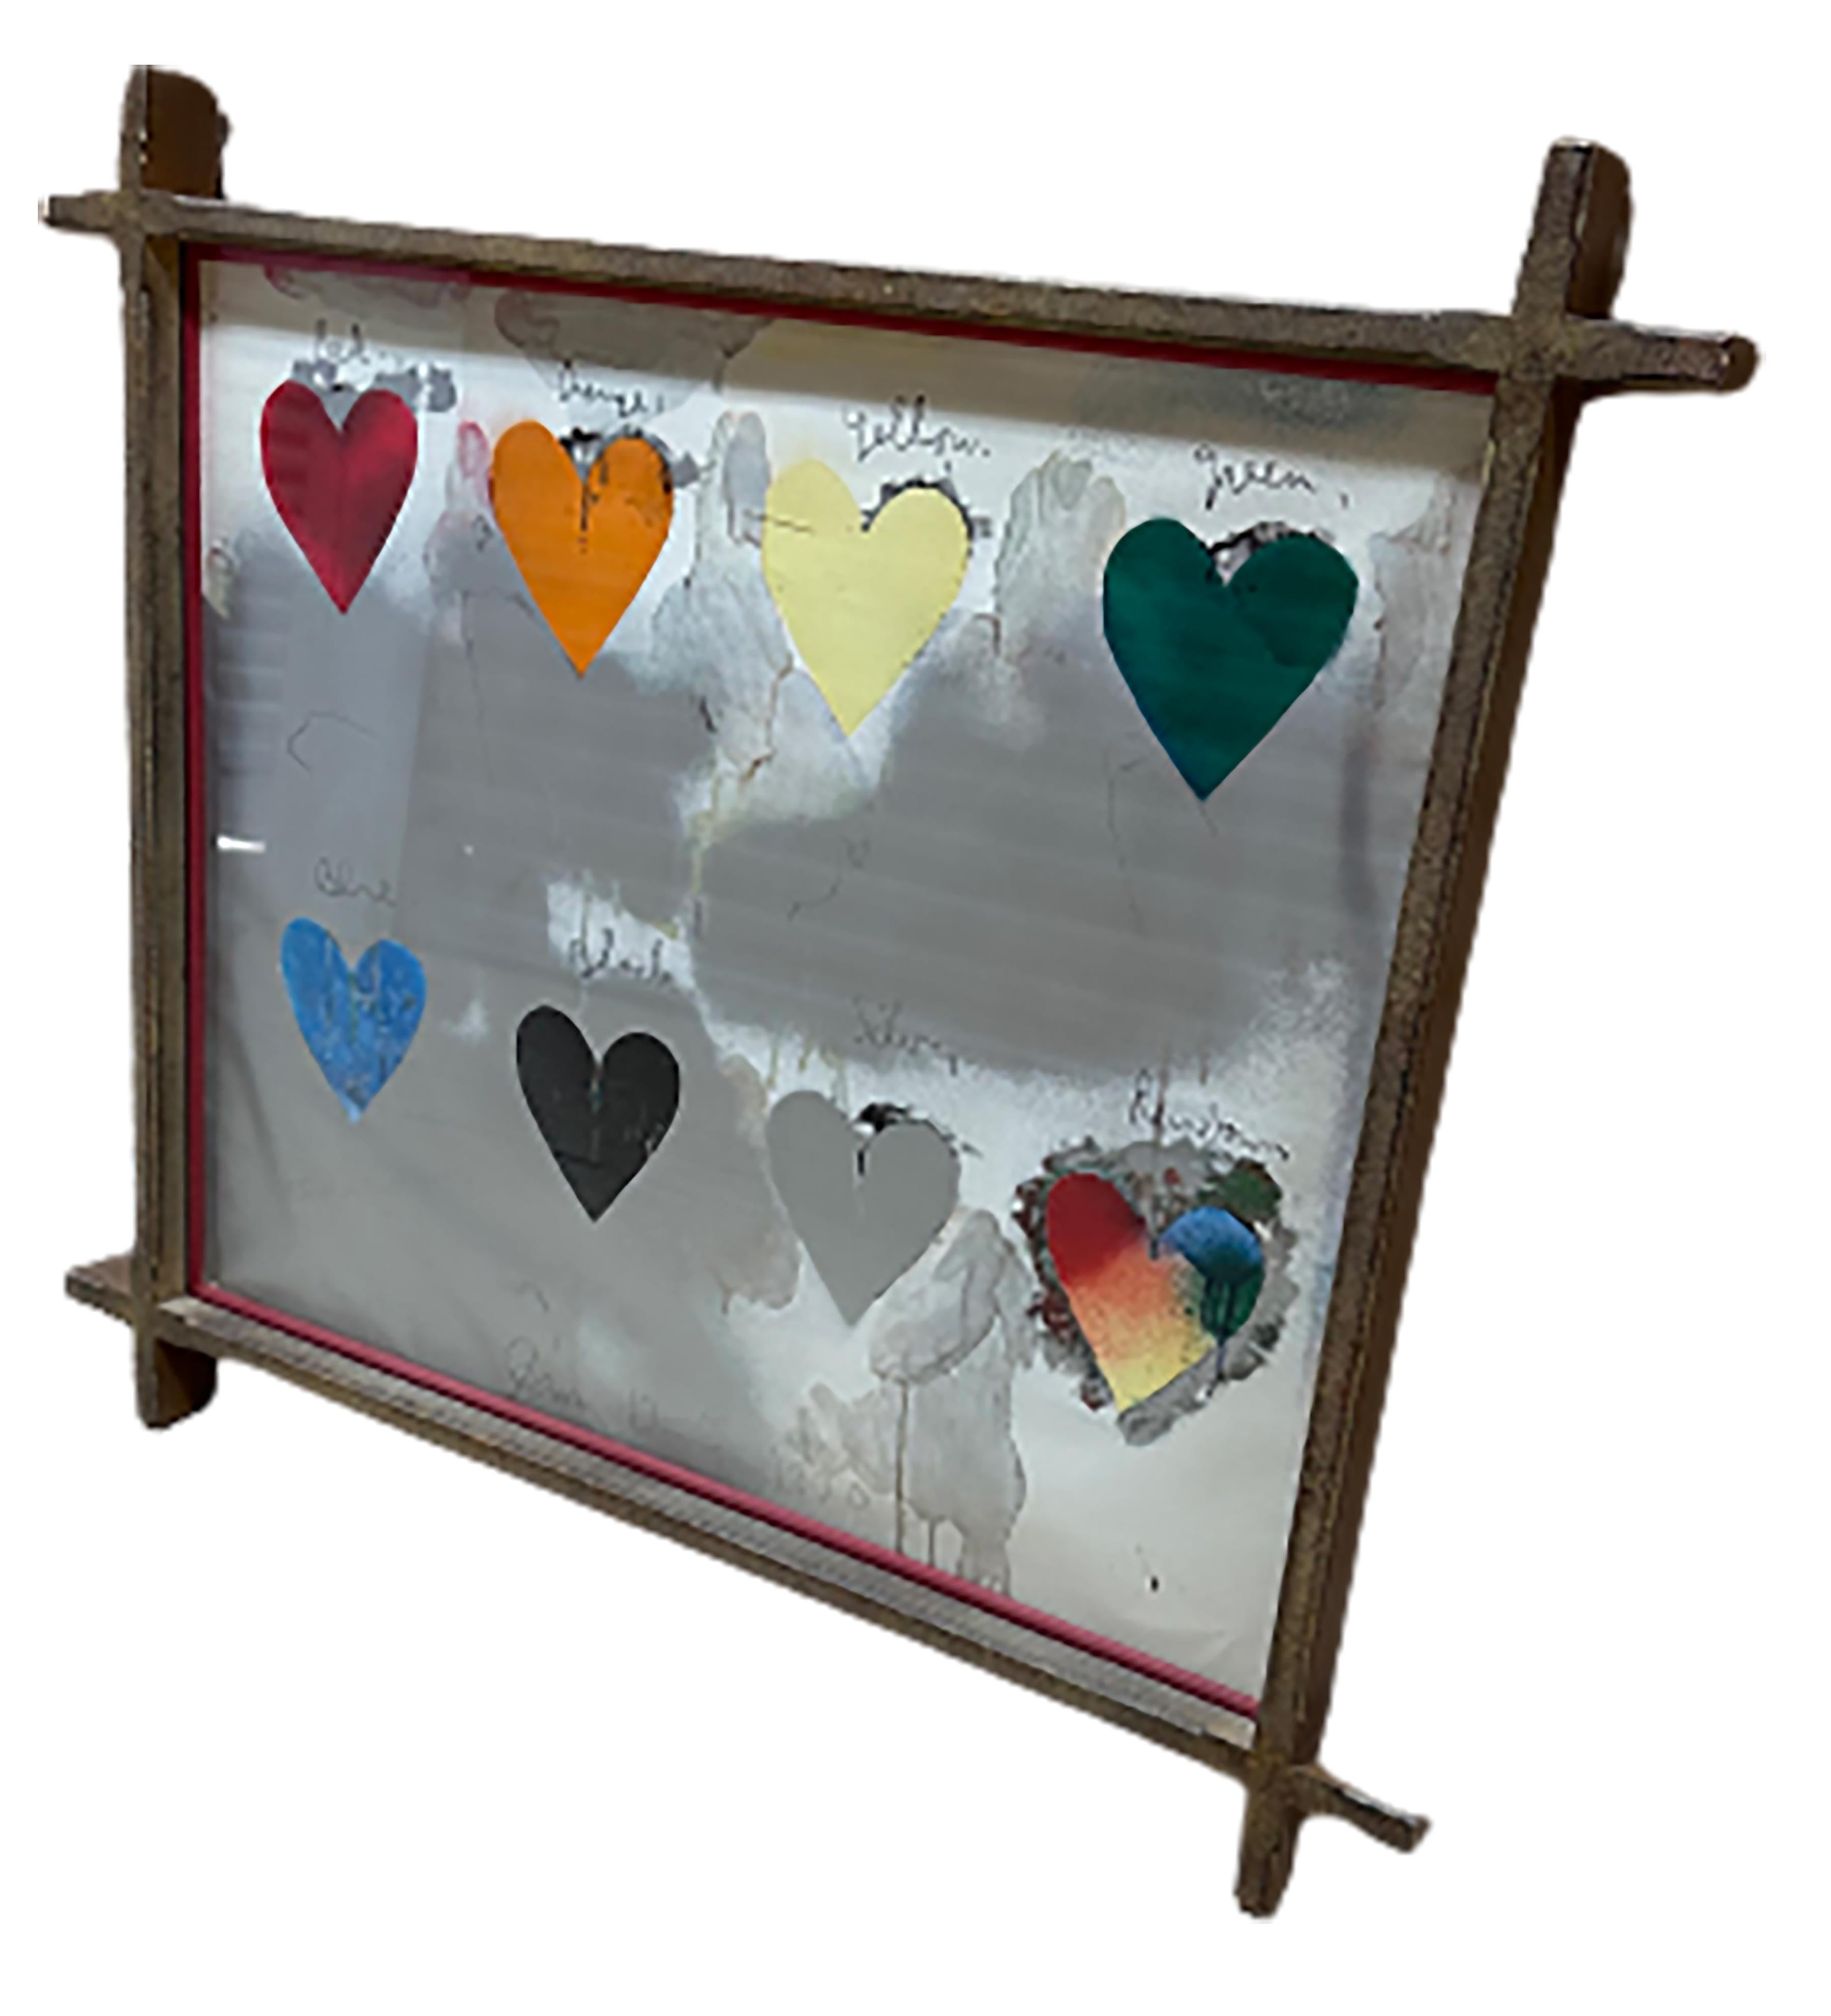 A mesmerizing abstract by artist Jim Dine from 1970 that incorporates elements of pop art and abstract expressionism. Offset lithograph on metallic paper.  “Hearts'' shows off a pattern of eight hearts in a row in different colors. It brings to mind